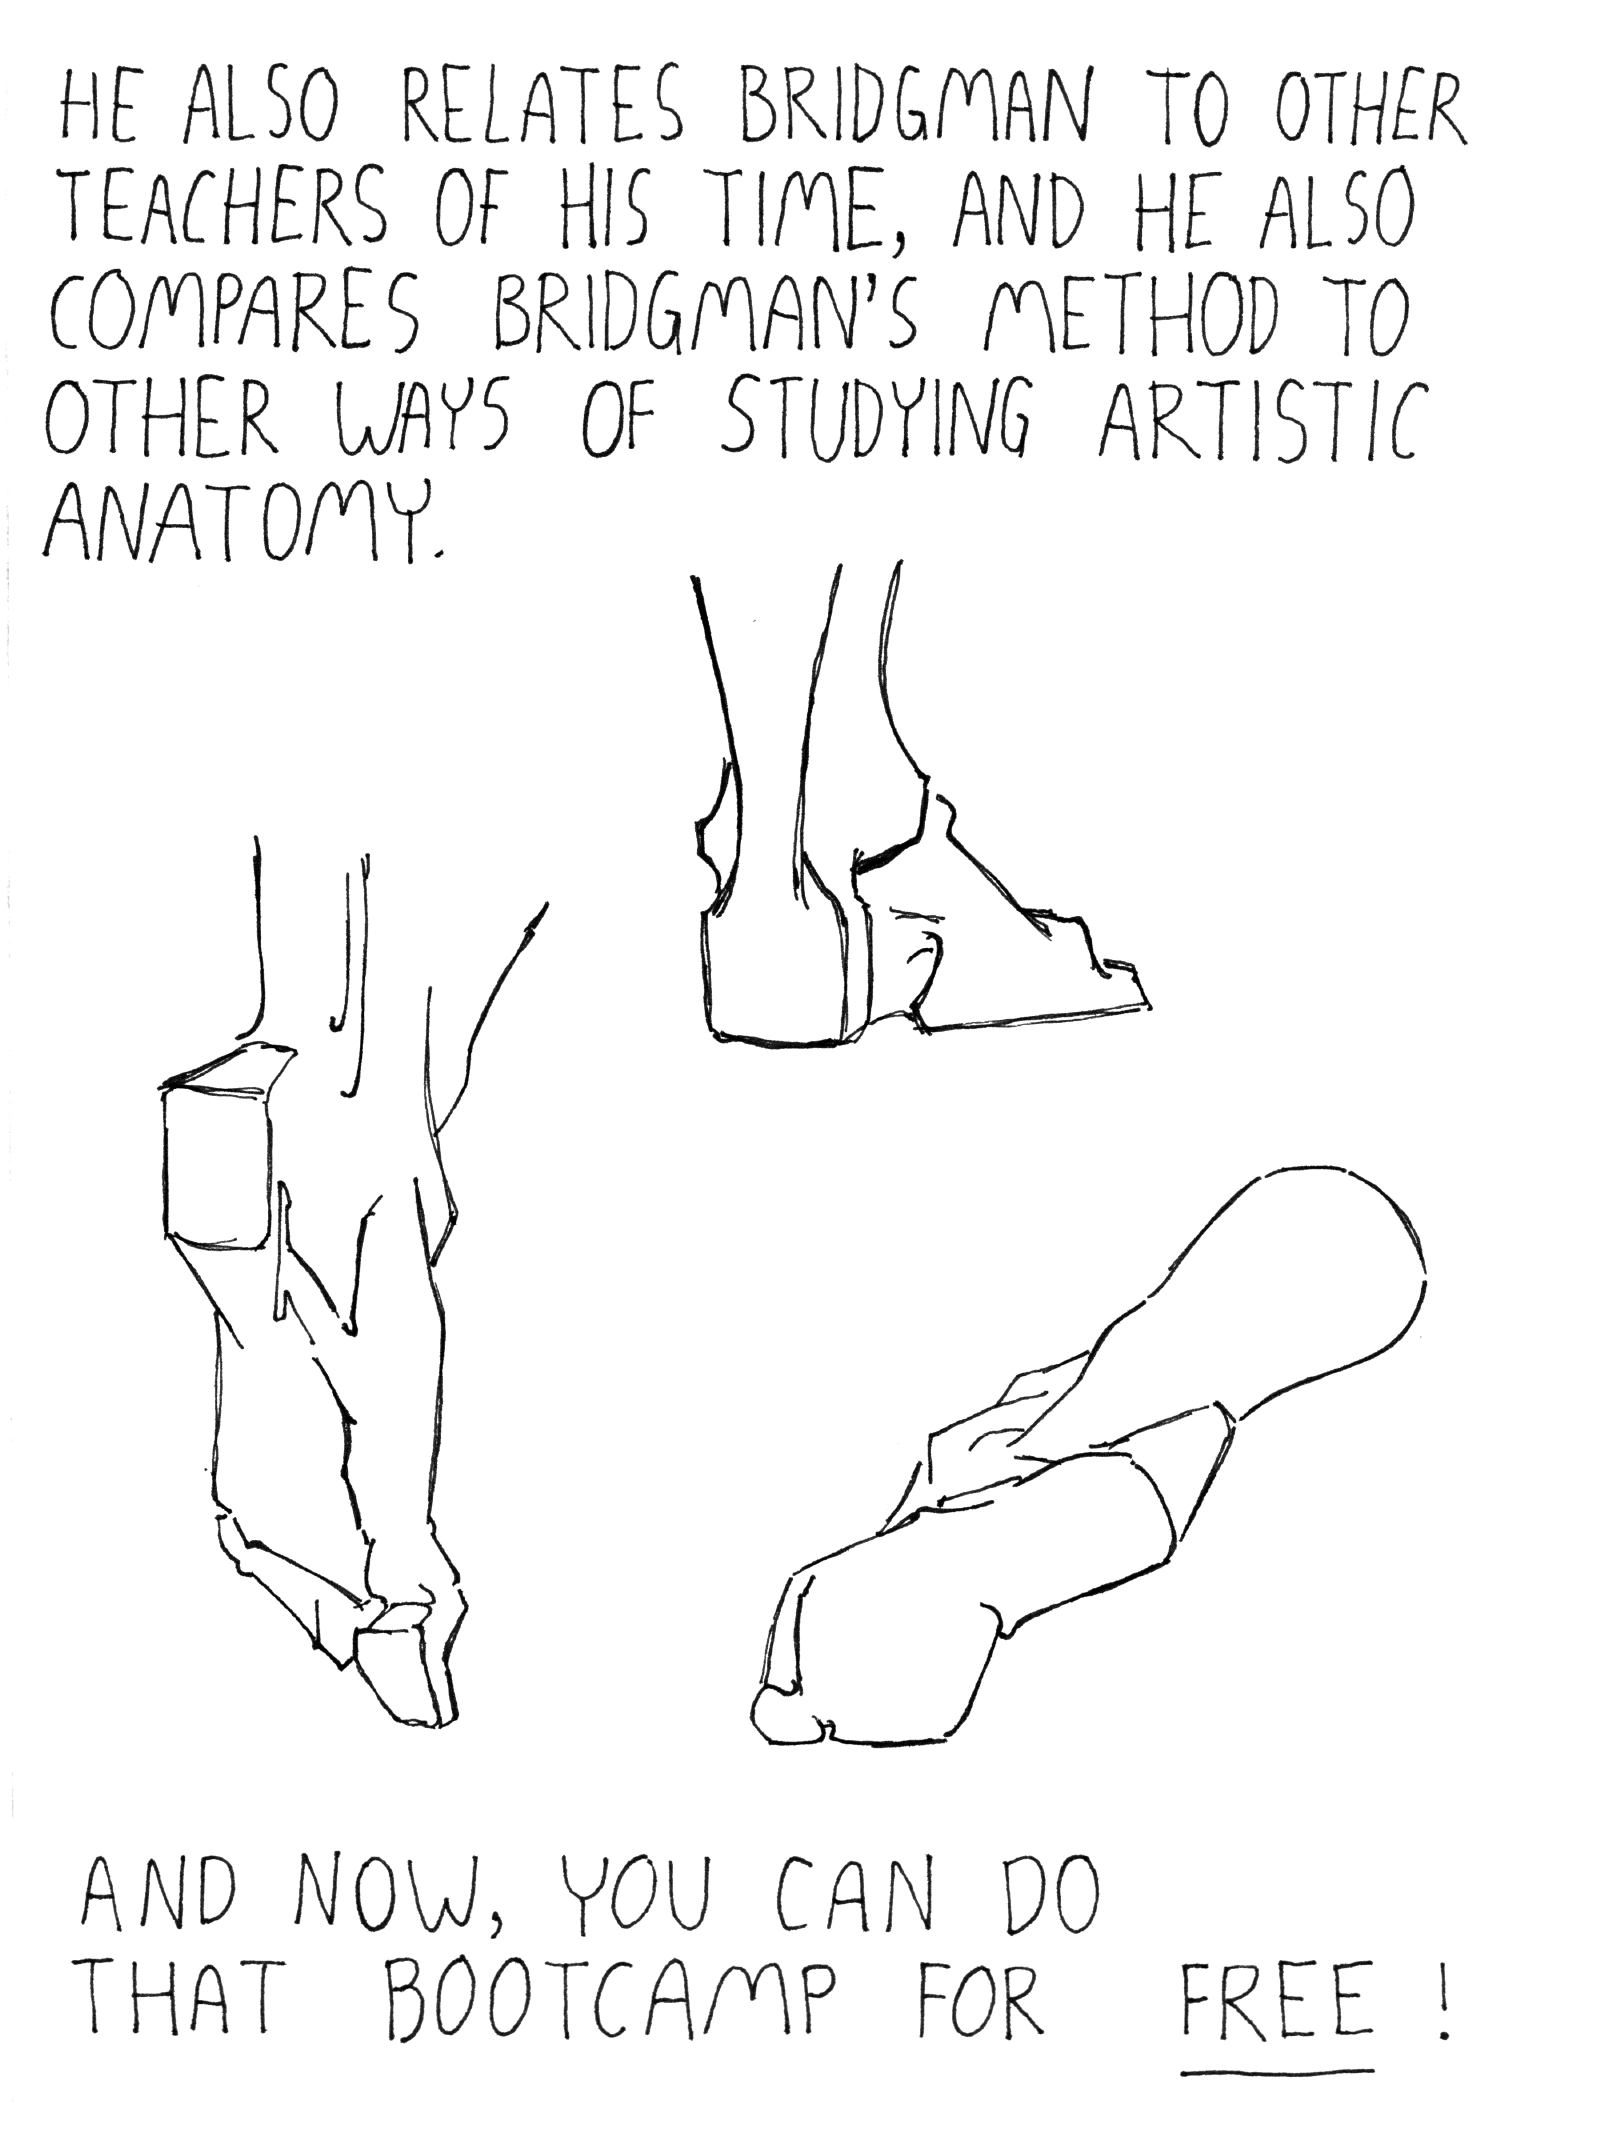 He also relates Bridgman to other teachers of his time, and he also compares Bridgman s method to other ways of studying artistic anatomy. And now you can do that bootcamp for free!